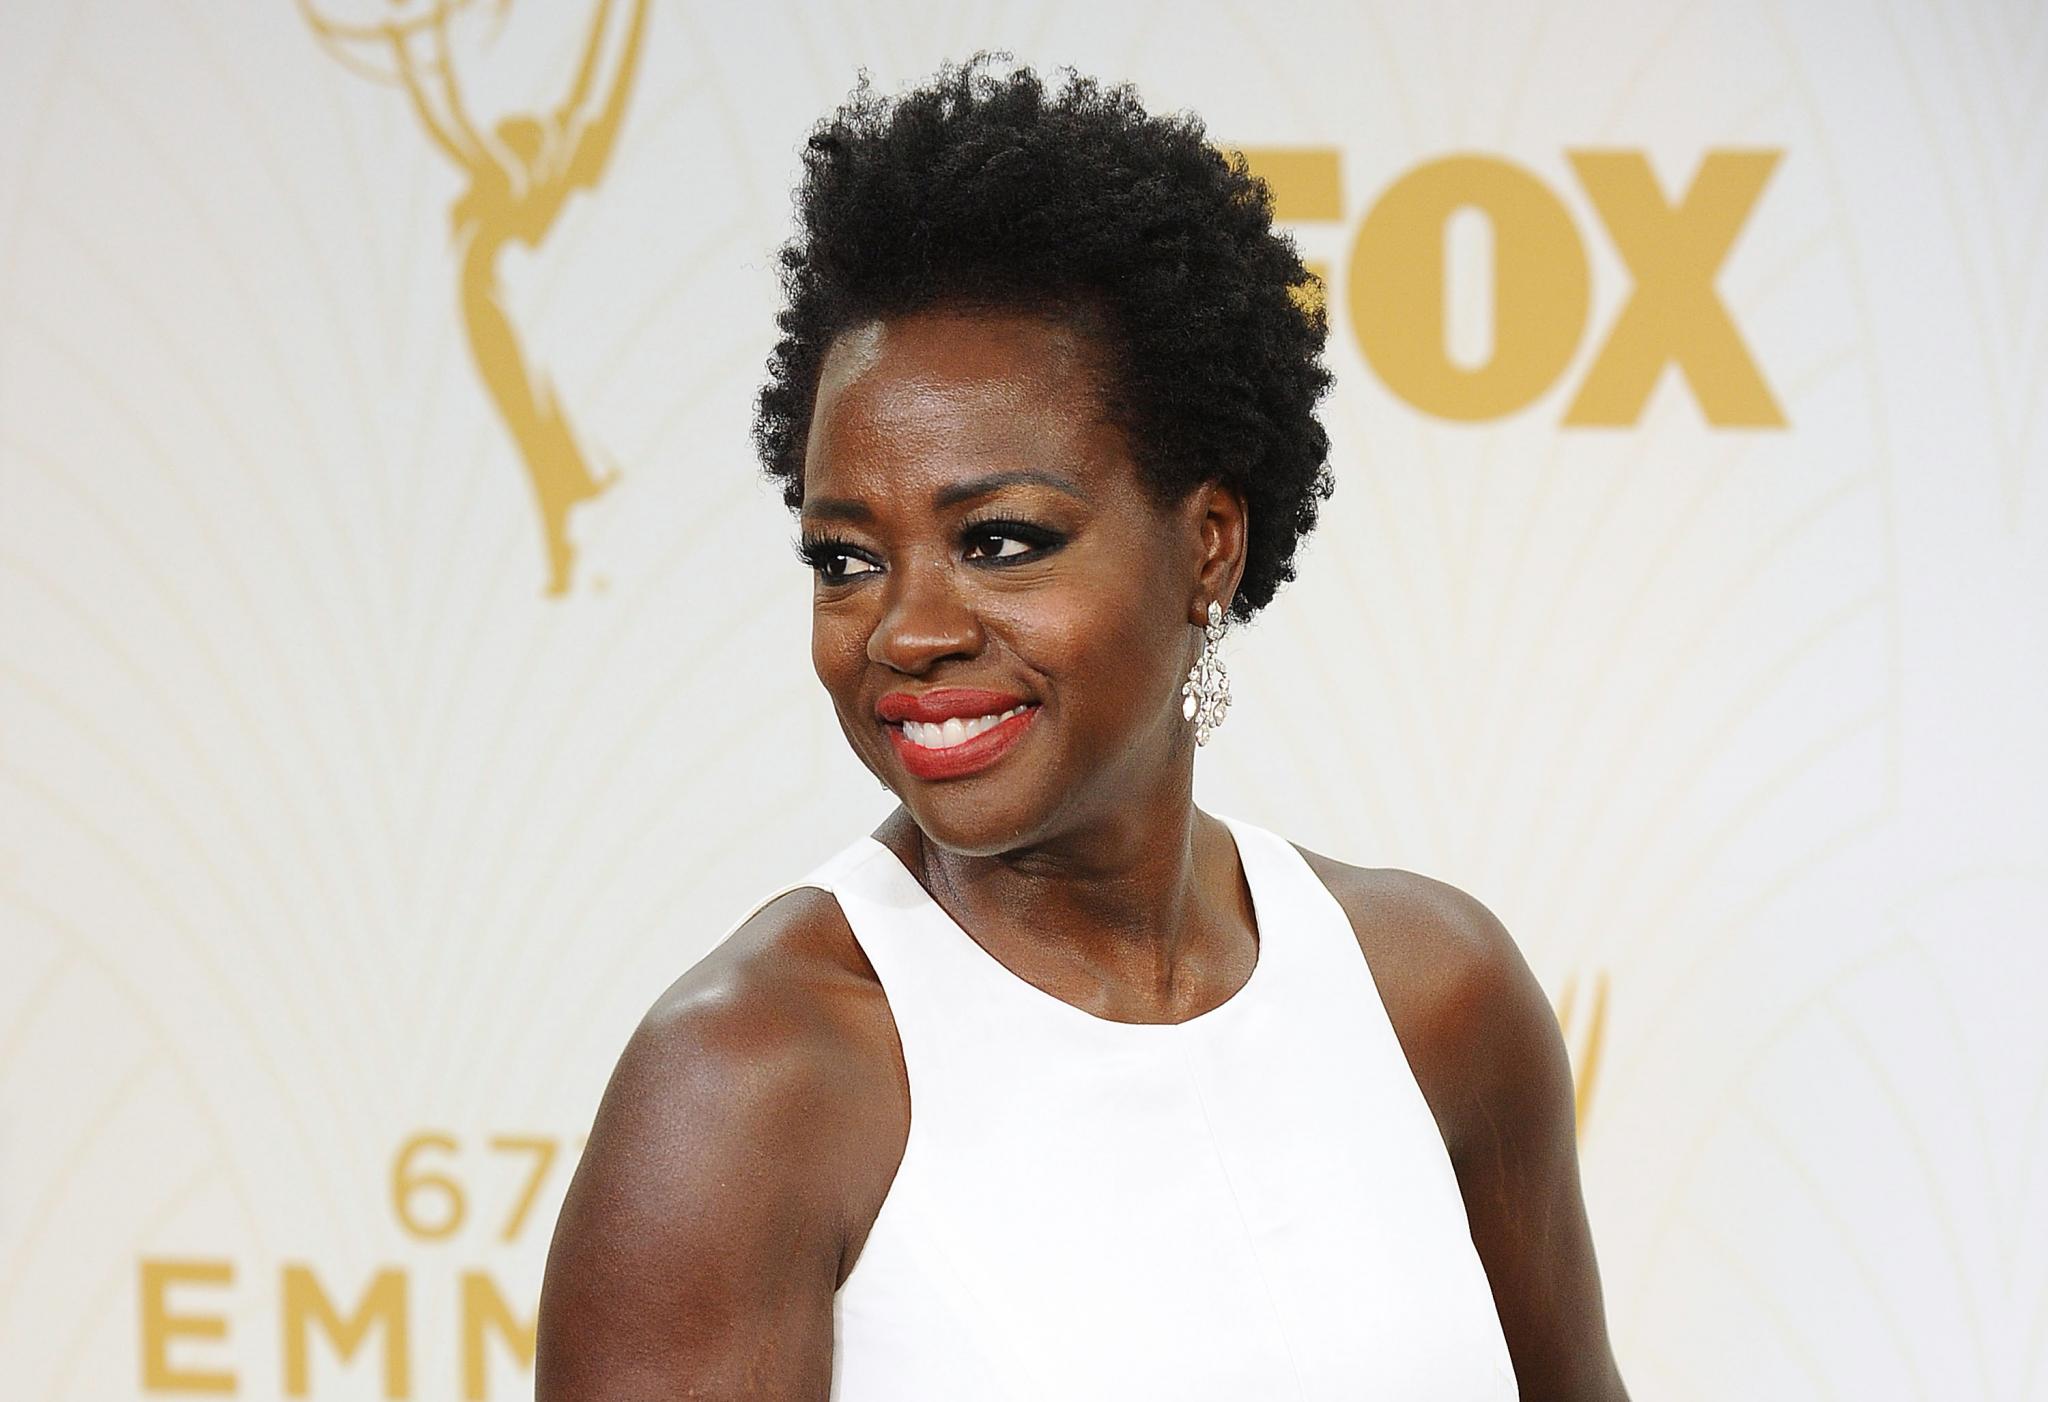 Viola Davis Surprised by Emmy Win: 'I Keep Expecting to Be That Little Girl Who Loses'
